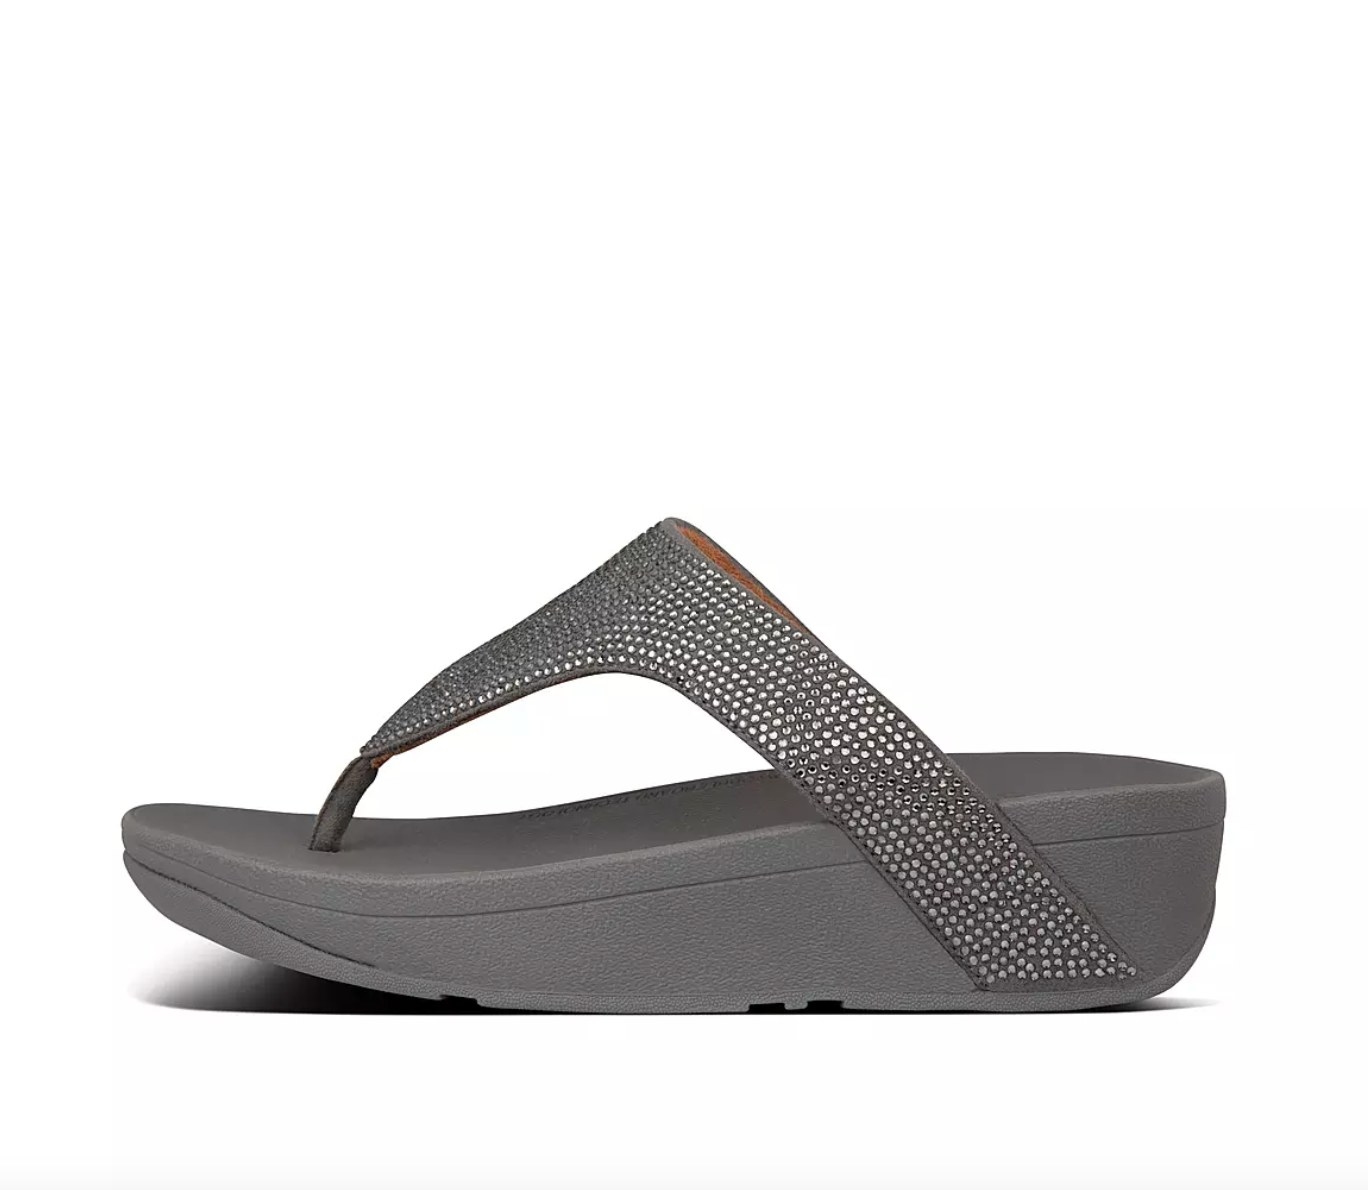 the shimmer crystal toe-post sandals in pewter